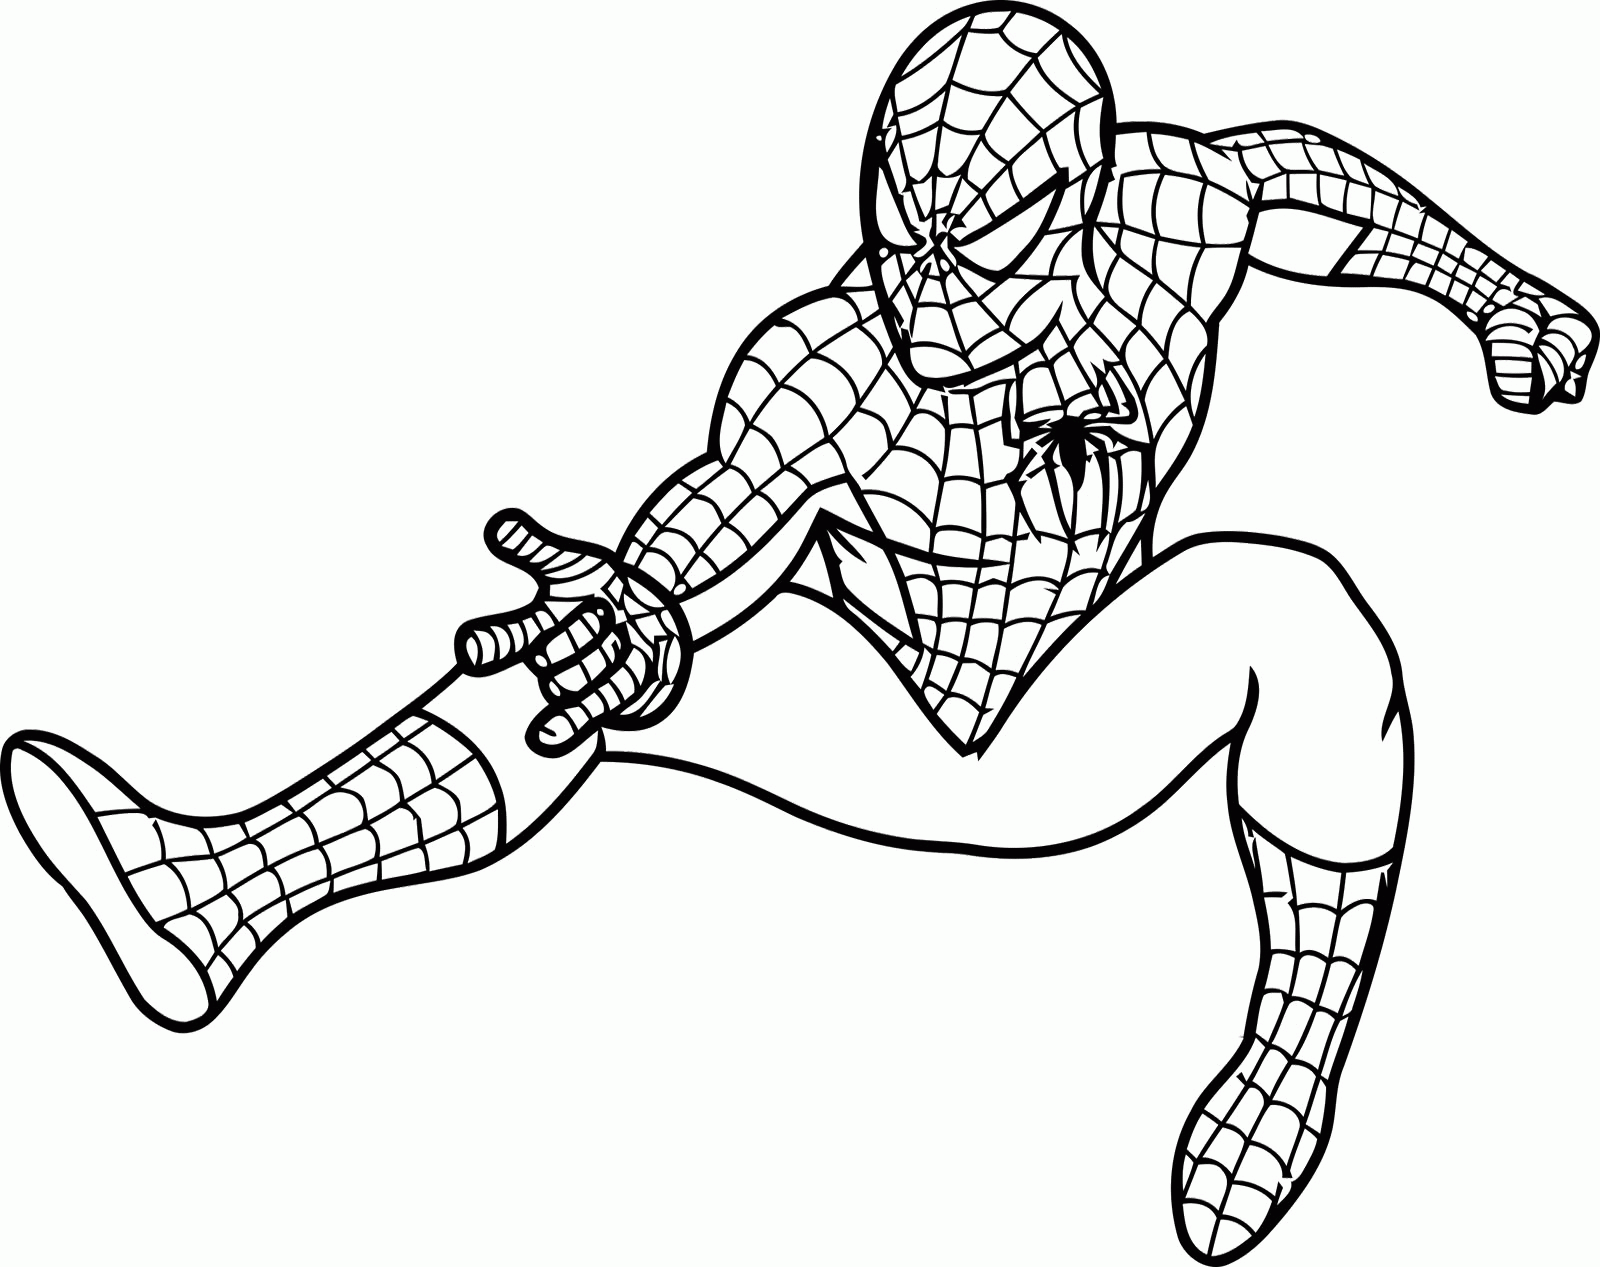 Ultimate Spiderman Coloring Pages - SheetalColor.com